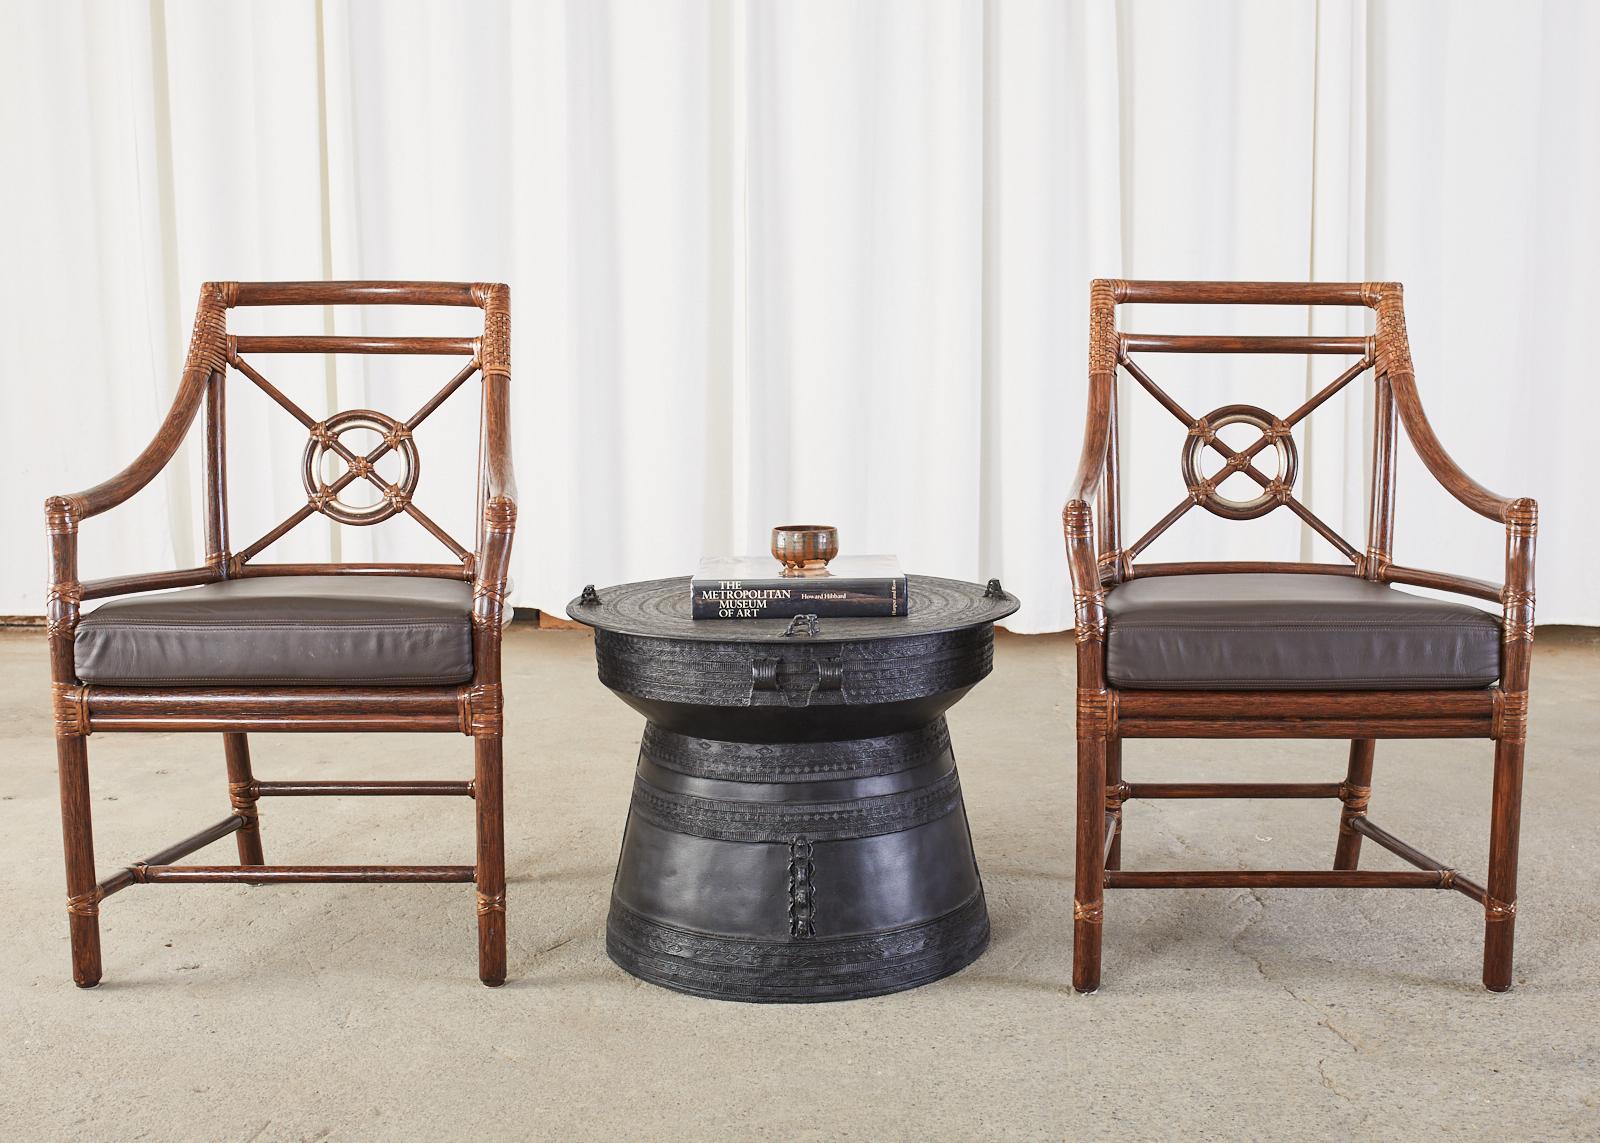 Large pair of Thai frog drums or rain drums featuring an ebonized metal finish. These drink side tables measures 24.5 inches across constructed from cast metal in a waisted form decorated with intricate geometric bands around the body and concentric